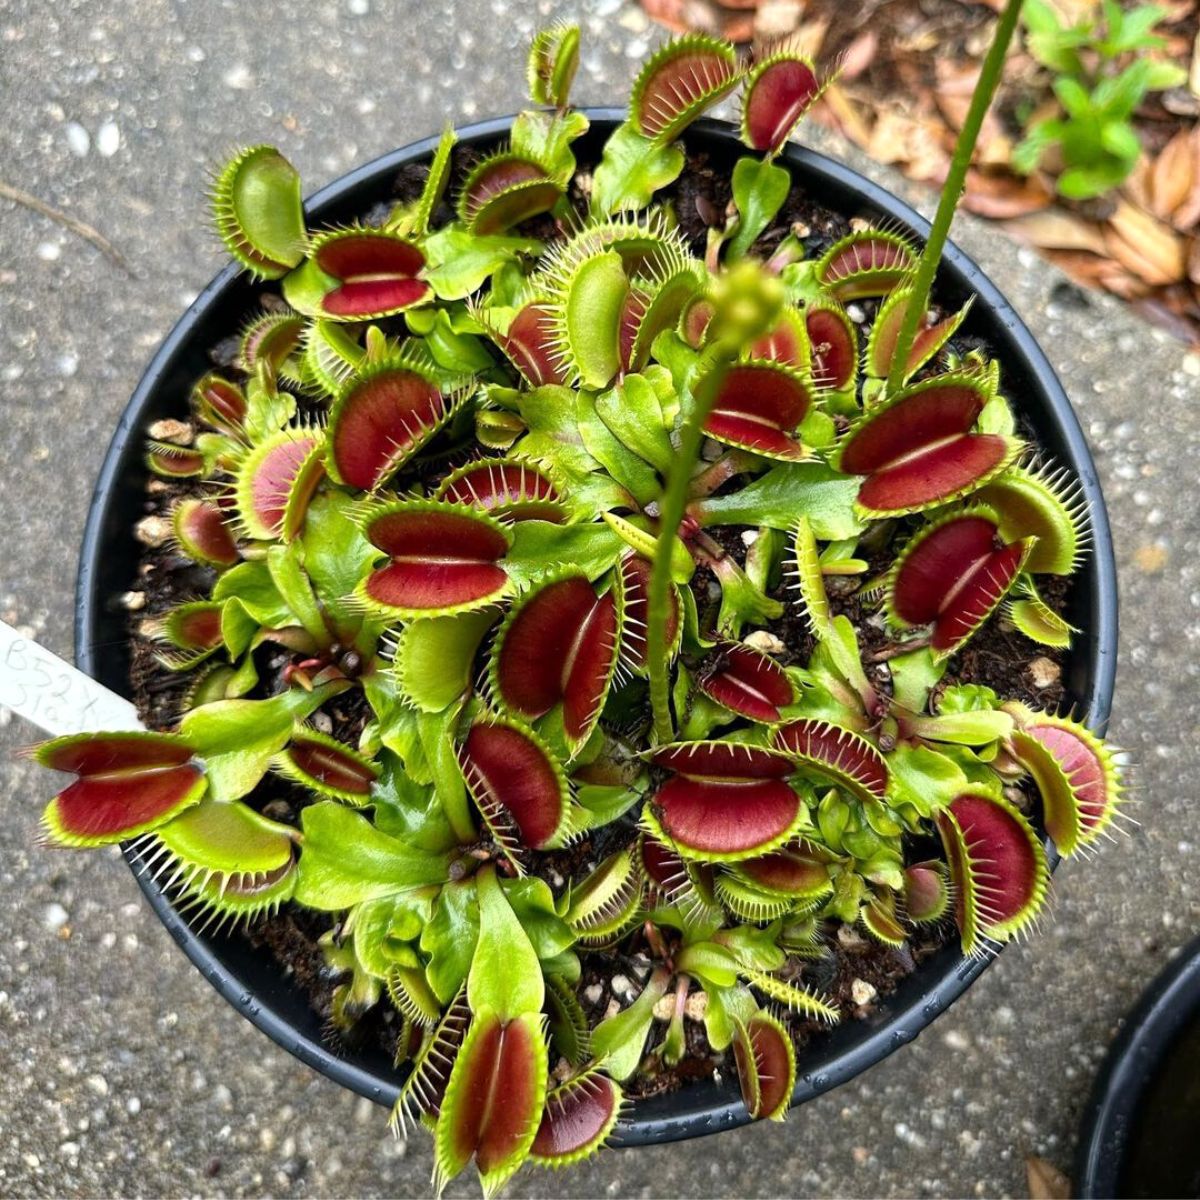 Water requirements for a venus flytrap plant